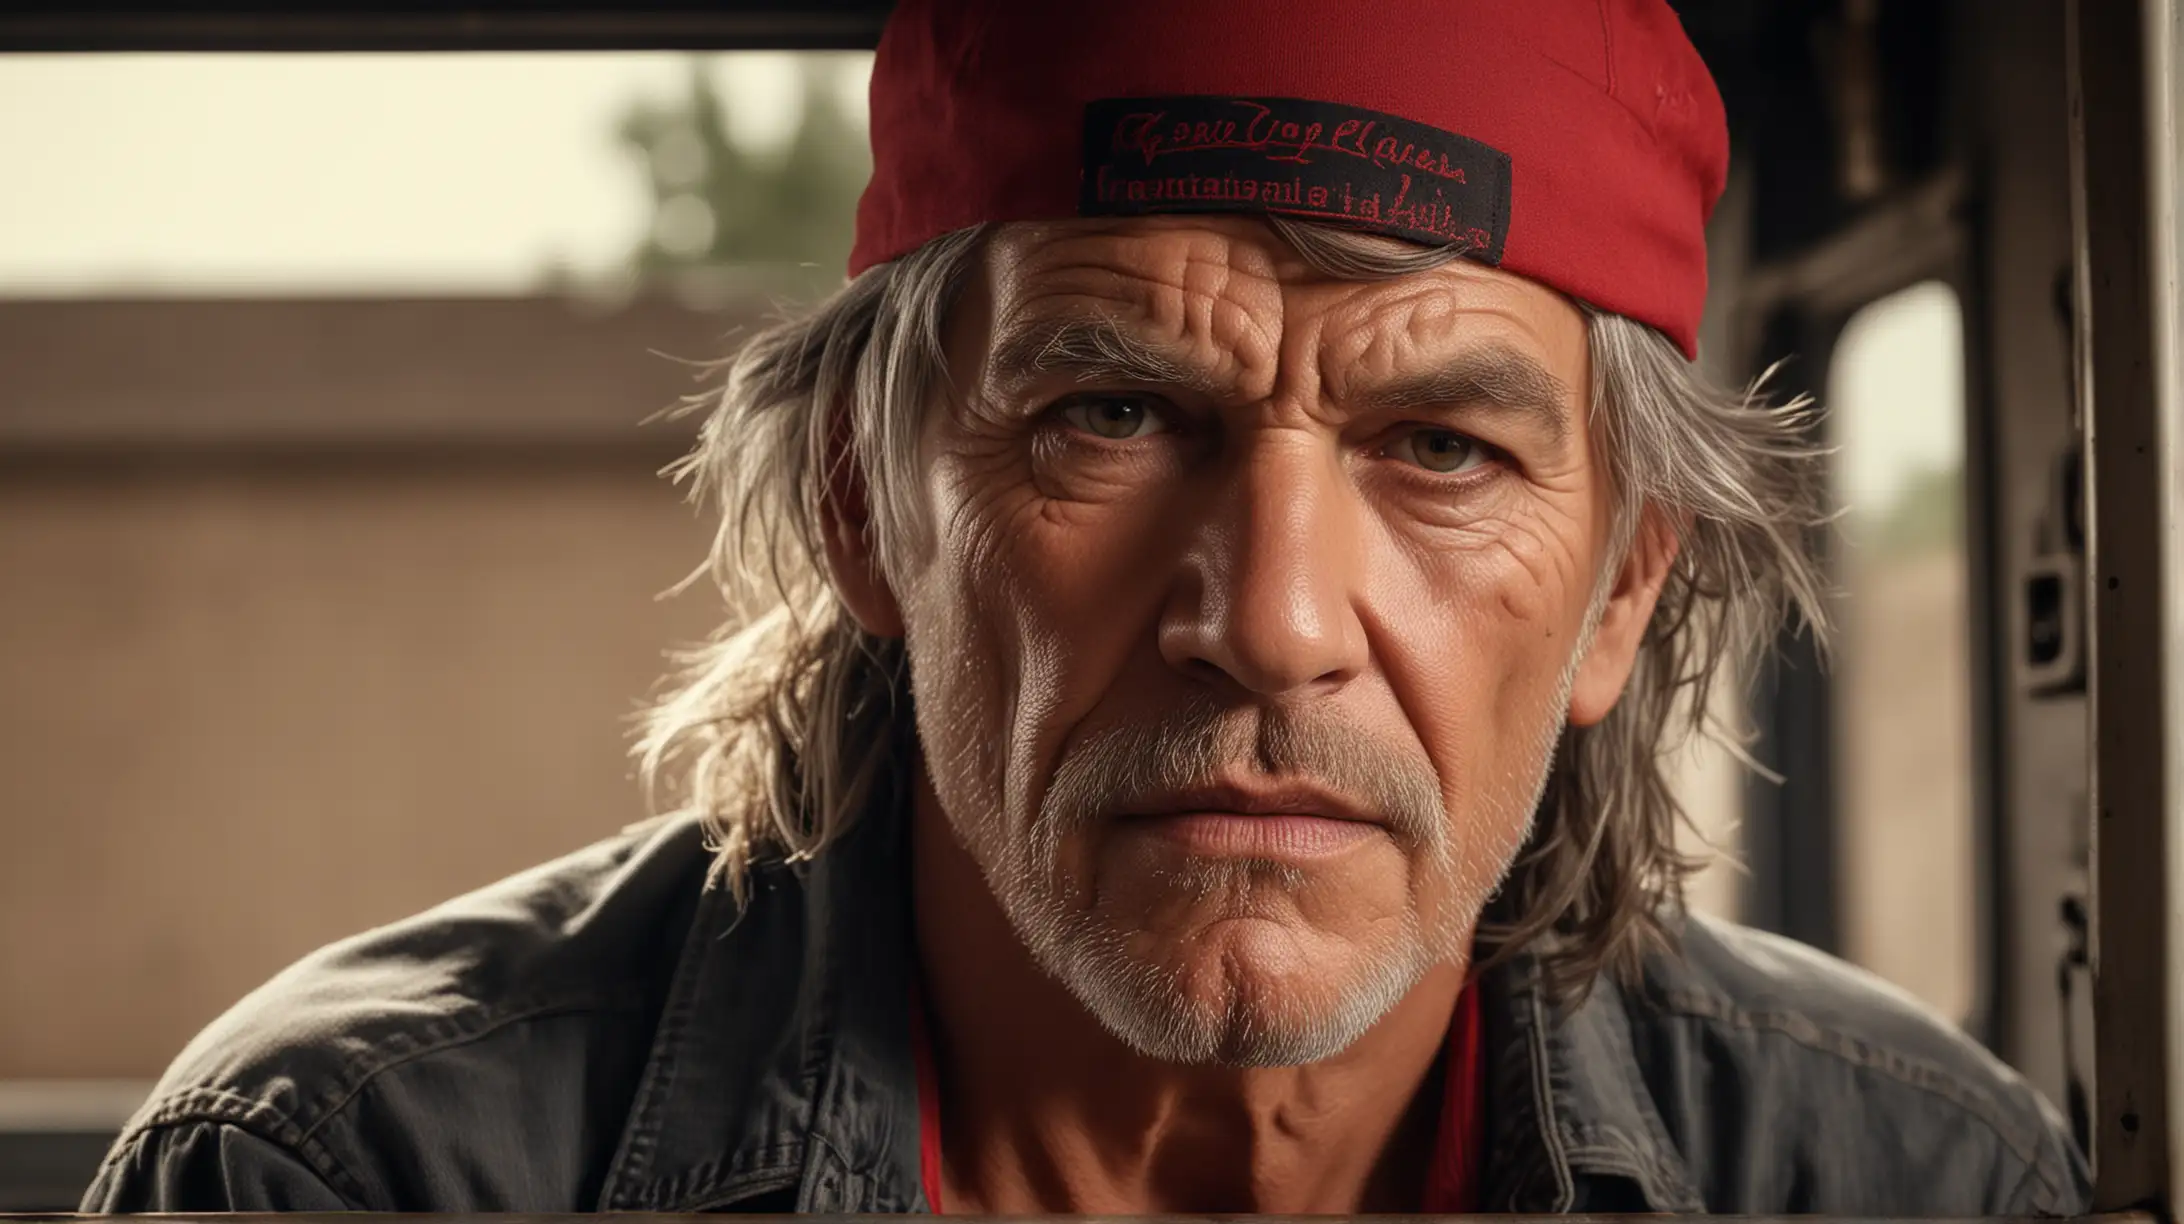 Serious CloseUp Portrait of Eric Roberts LookAlike in Truck Cab